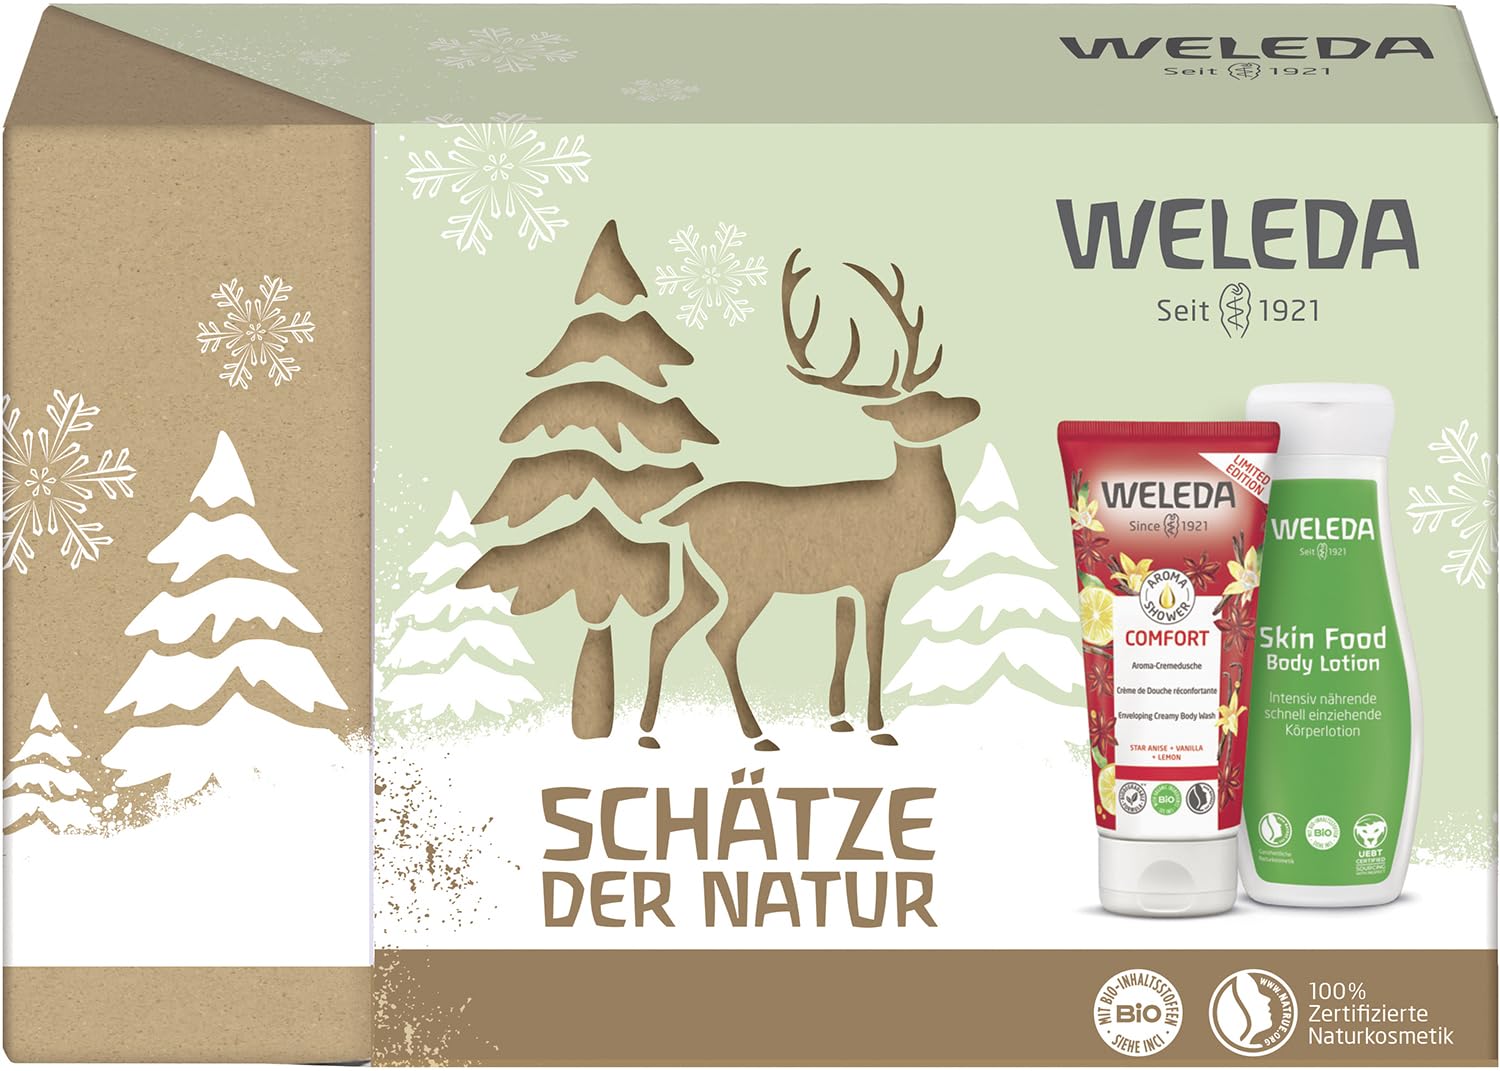 WELEDA Organic Christmas Gift Set - Natural Cosmetics Winter Xmas Gift Set with Aroma Shower Comfort Shower Gel & Skin Food Body Lotion Sustainable Body Care Set for Women & Men for Christmas